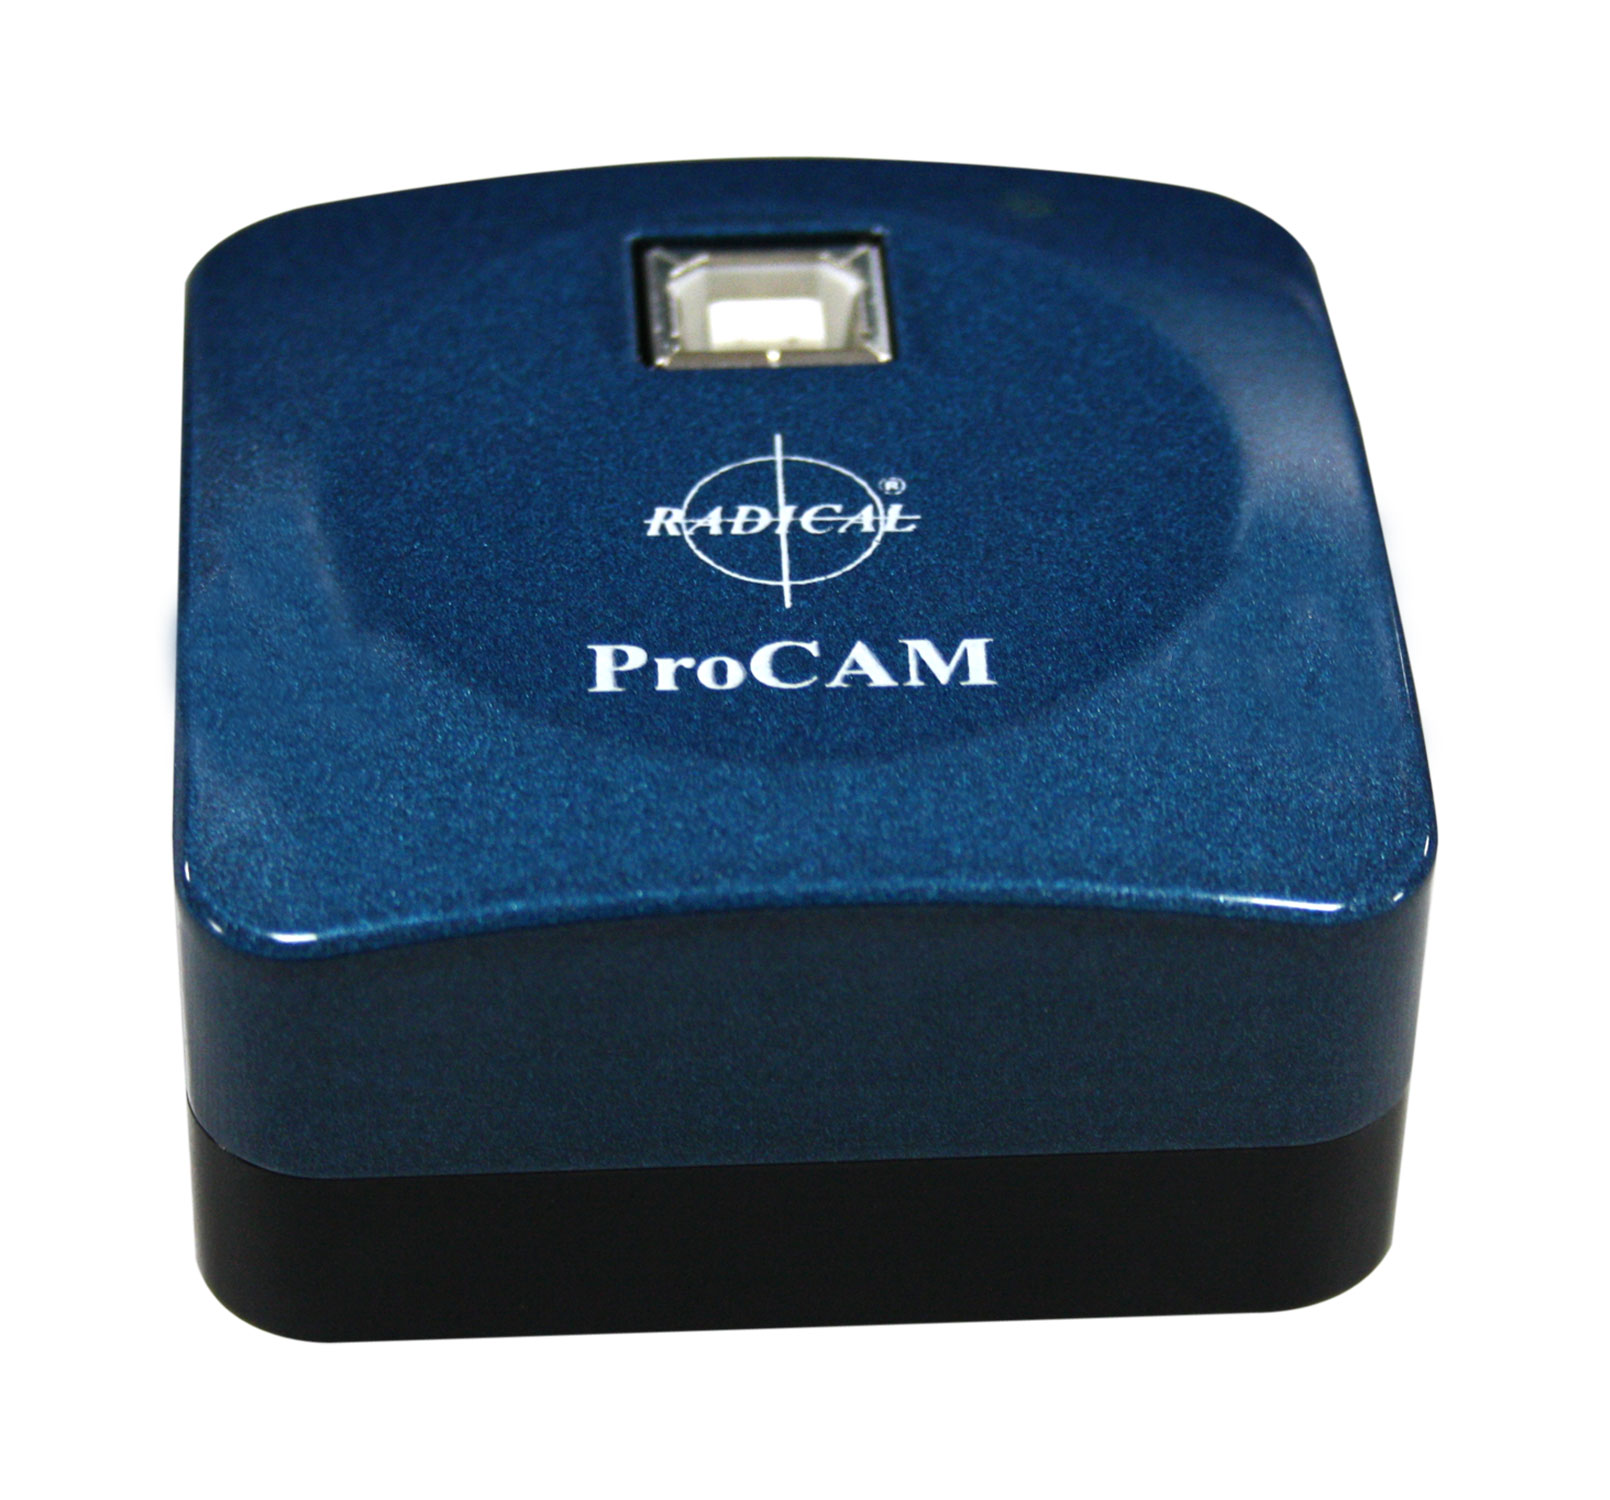 Procame CCD UHS Cameras